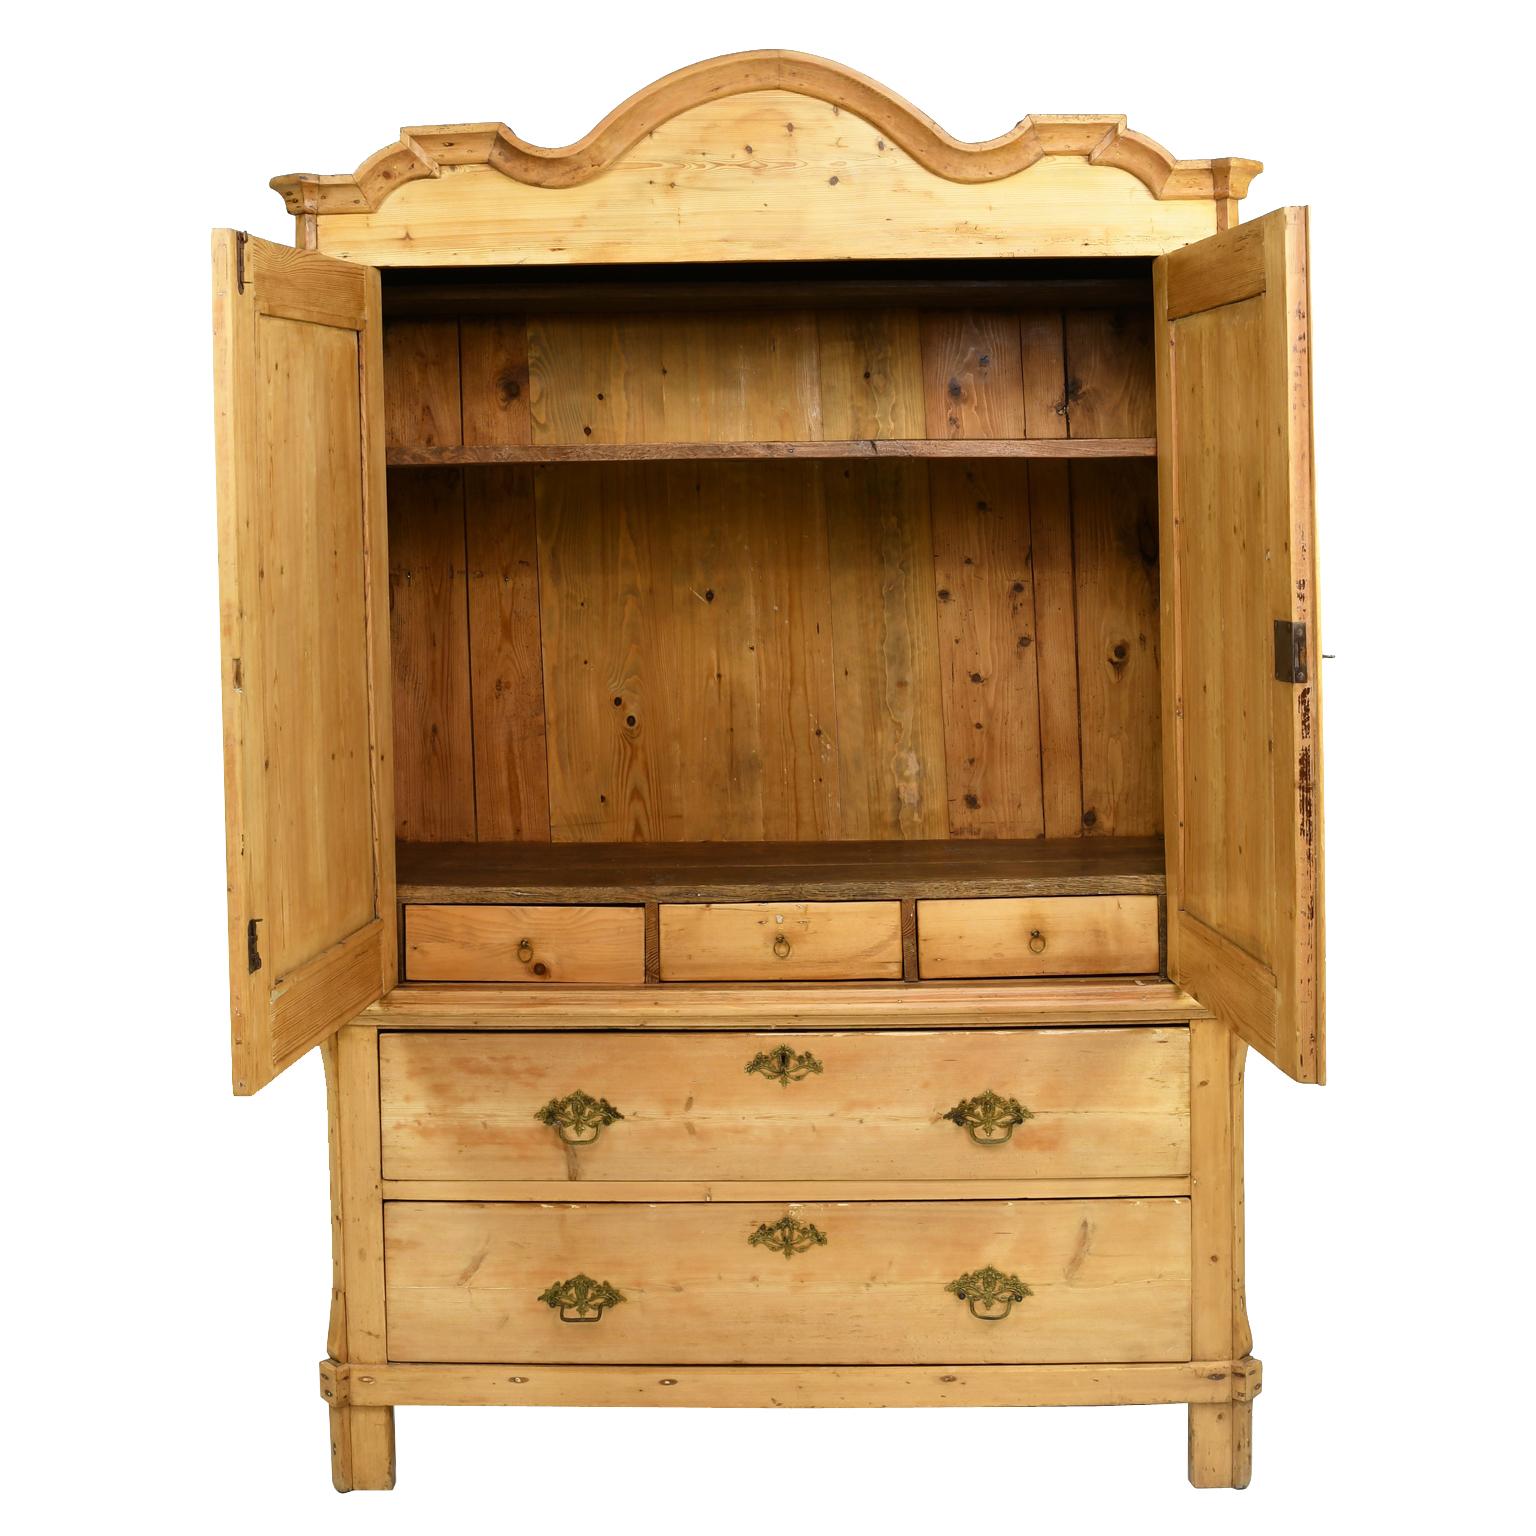 A lovely Dutch linen press or kast (cabinet) in light, honey-colored pine from the Netherlands, circa 1820, during the reign of King William I. Features an arched bonnet over a cabinet with two doors with recessed panels that have scalloped borders,